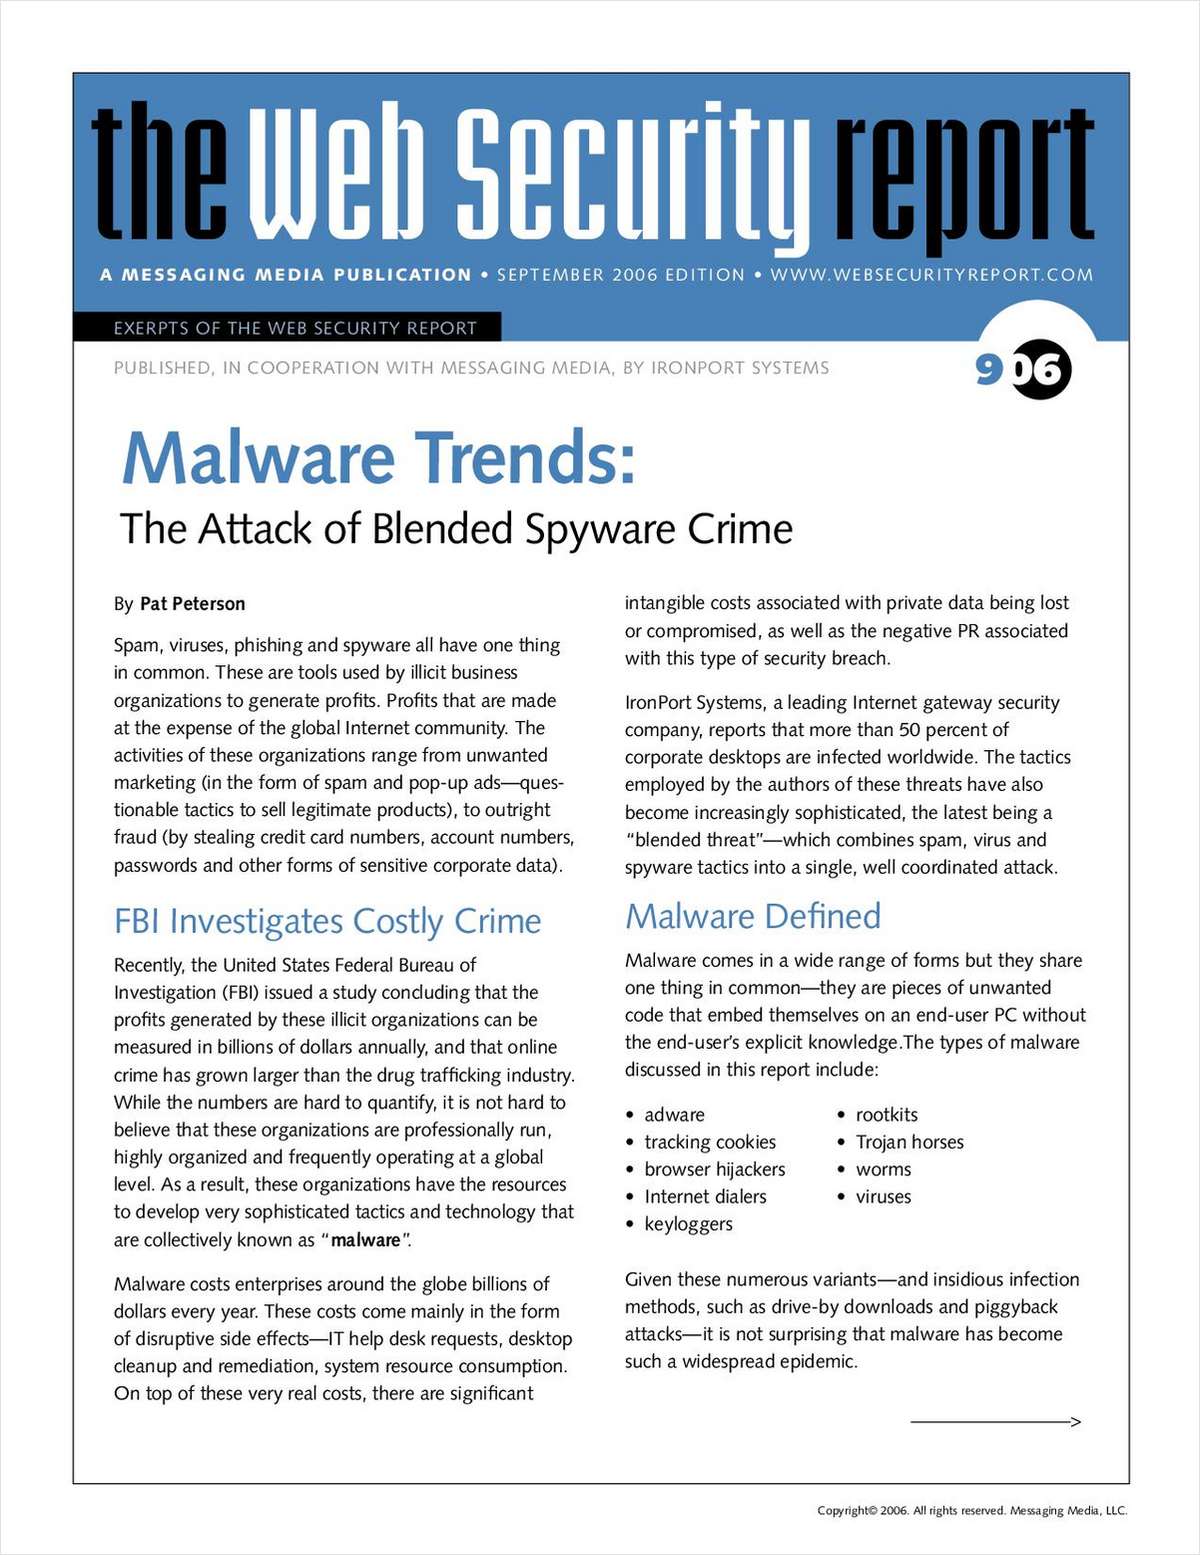 Web Security Report: The Attack of Blended Spyware Crime